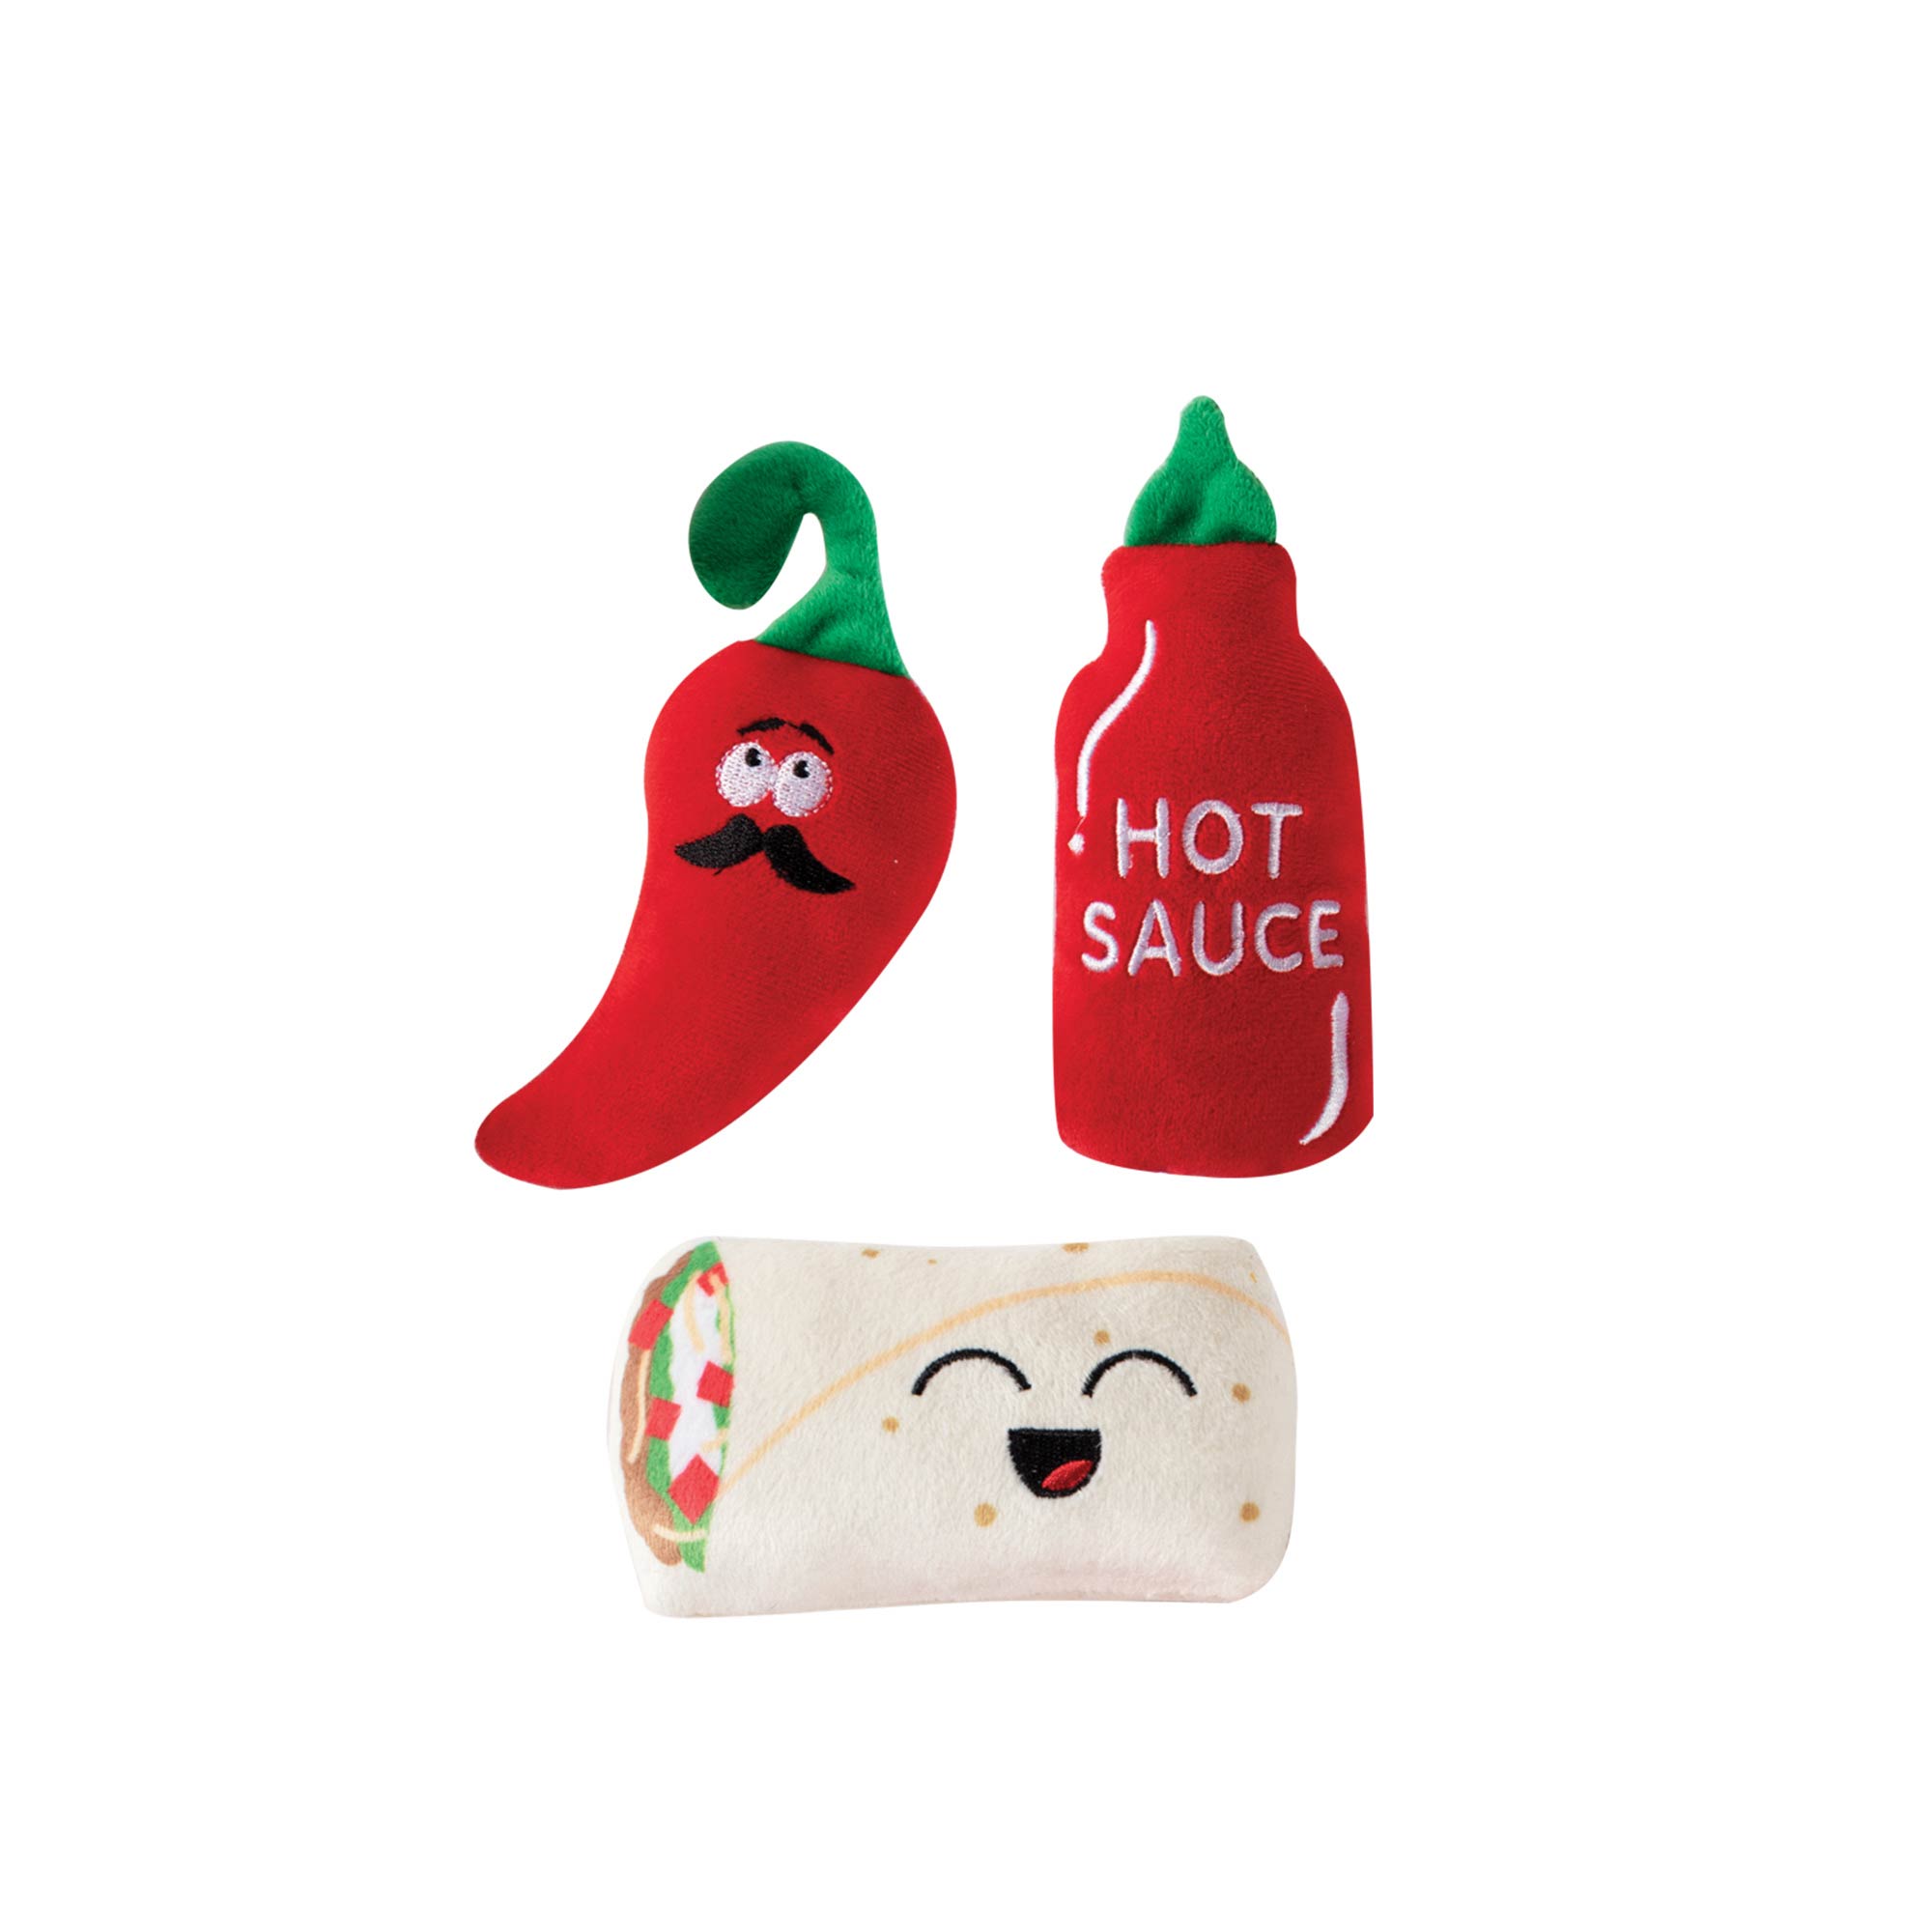 Petshop x Play On Hot & Spicy Dog Toy Set, 3 Pieces